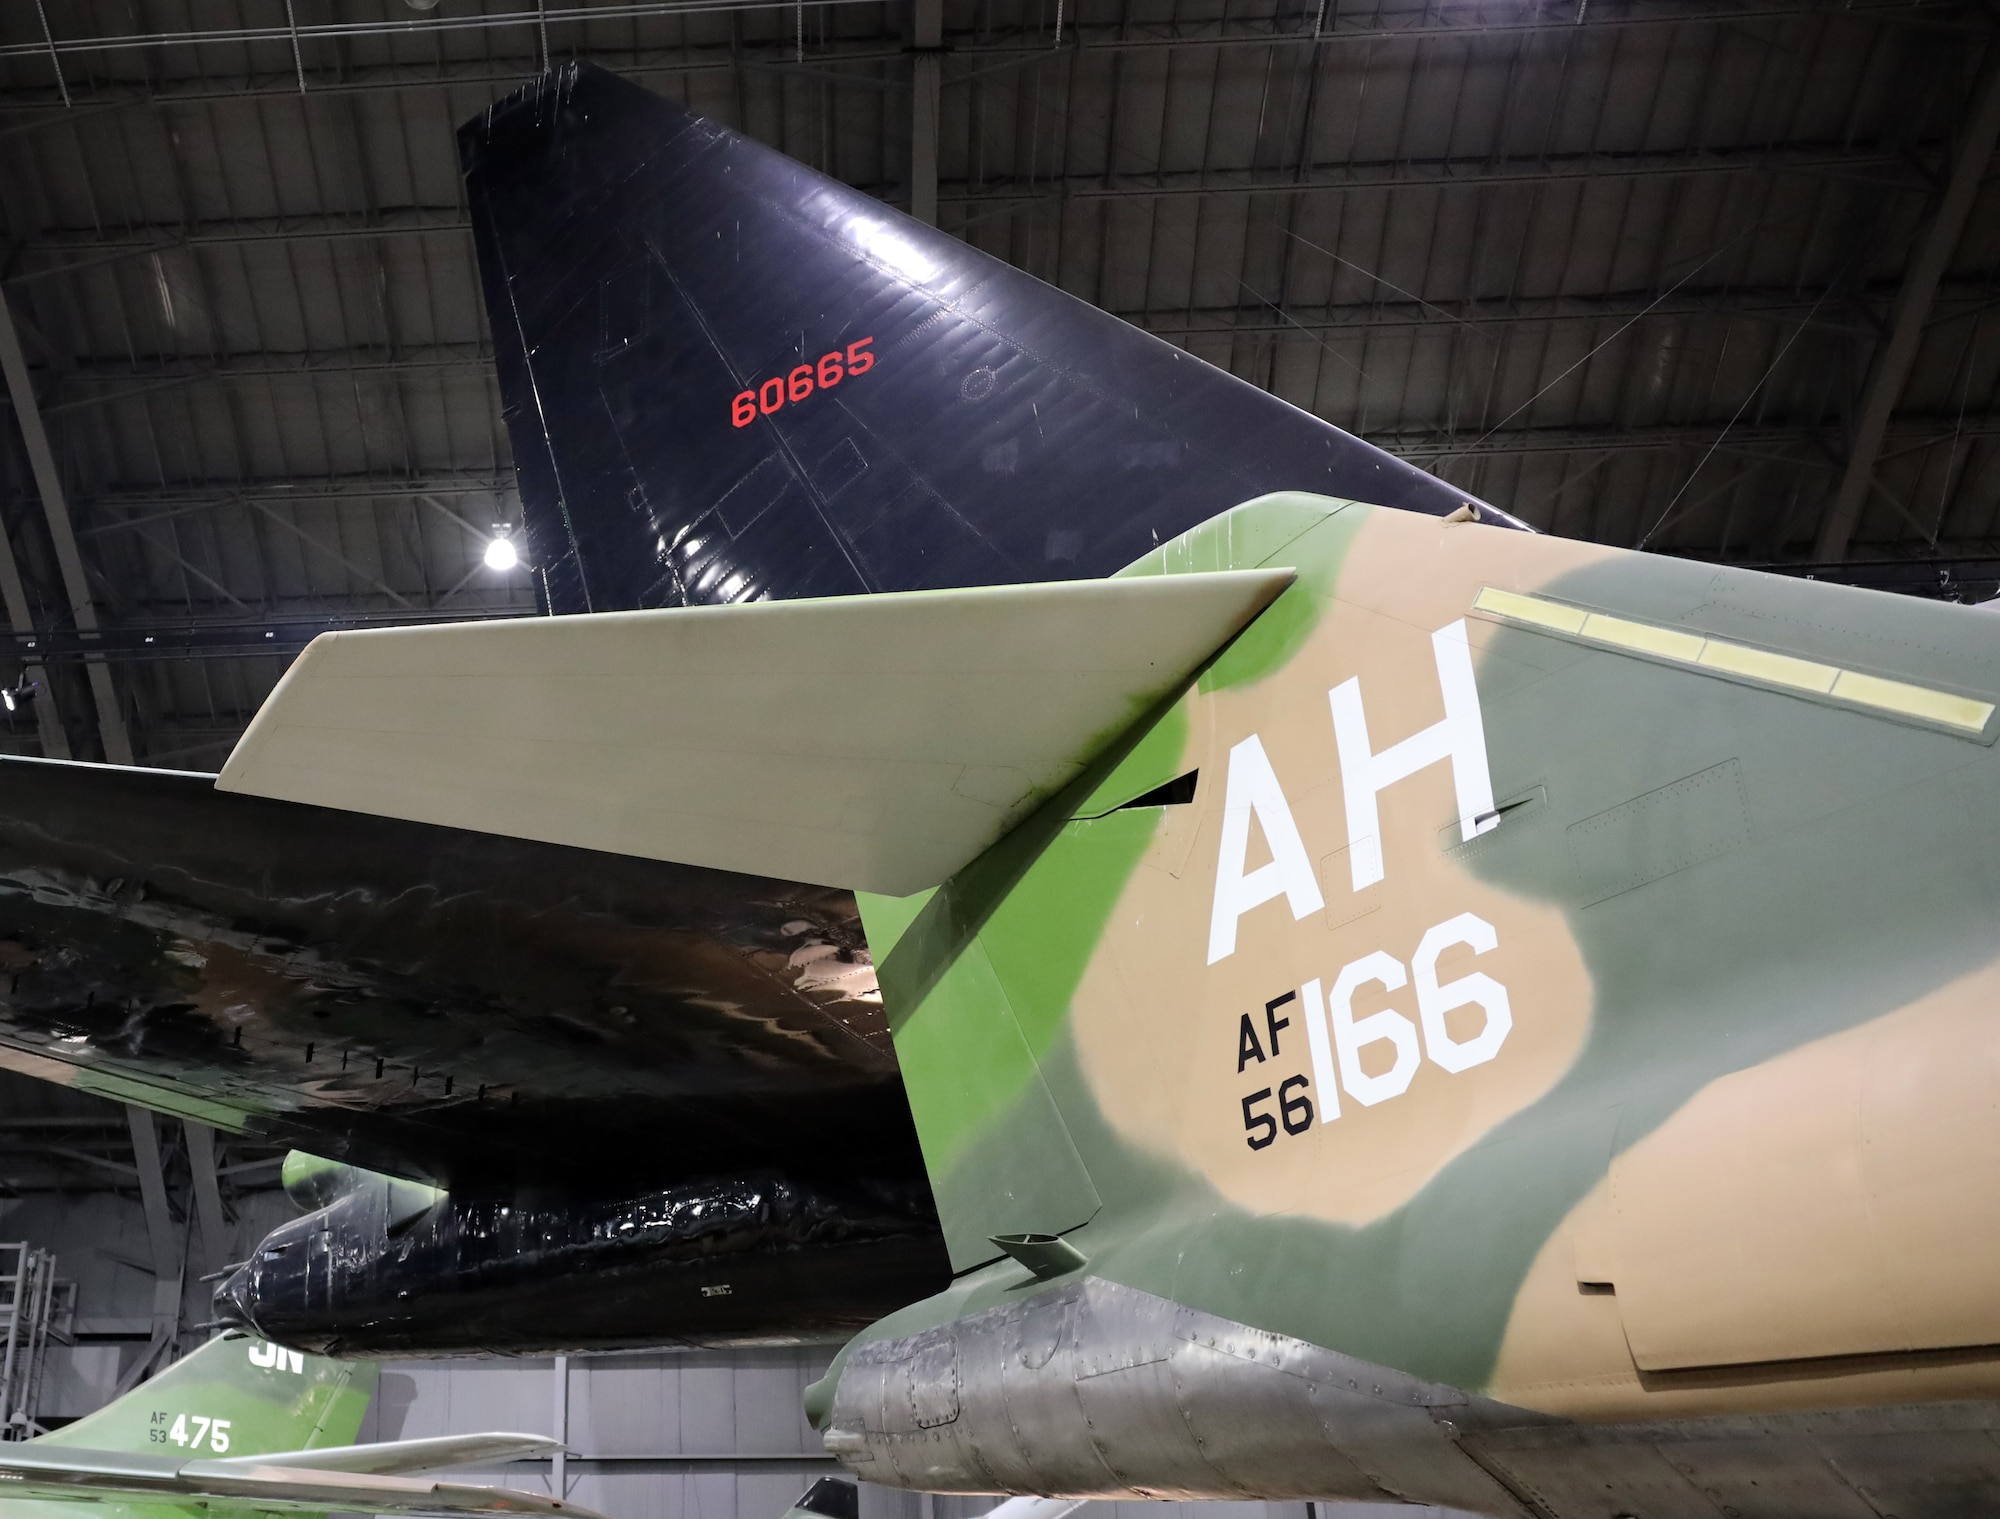 View of museum aircraft McDonnell RF-101C Voodoo tail.